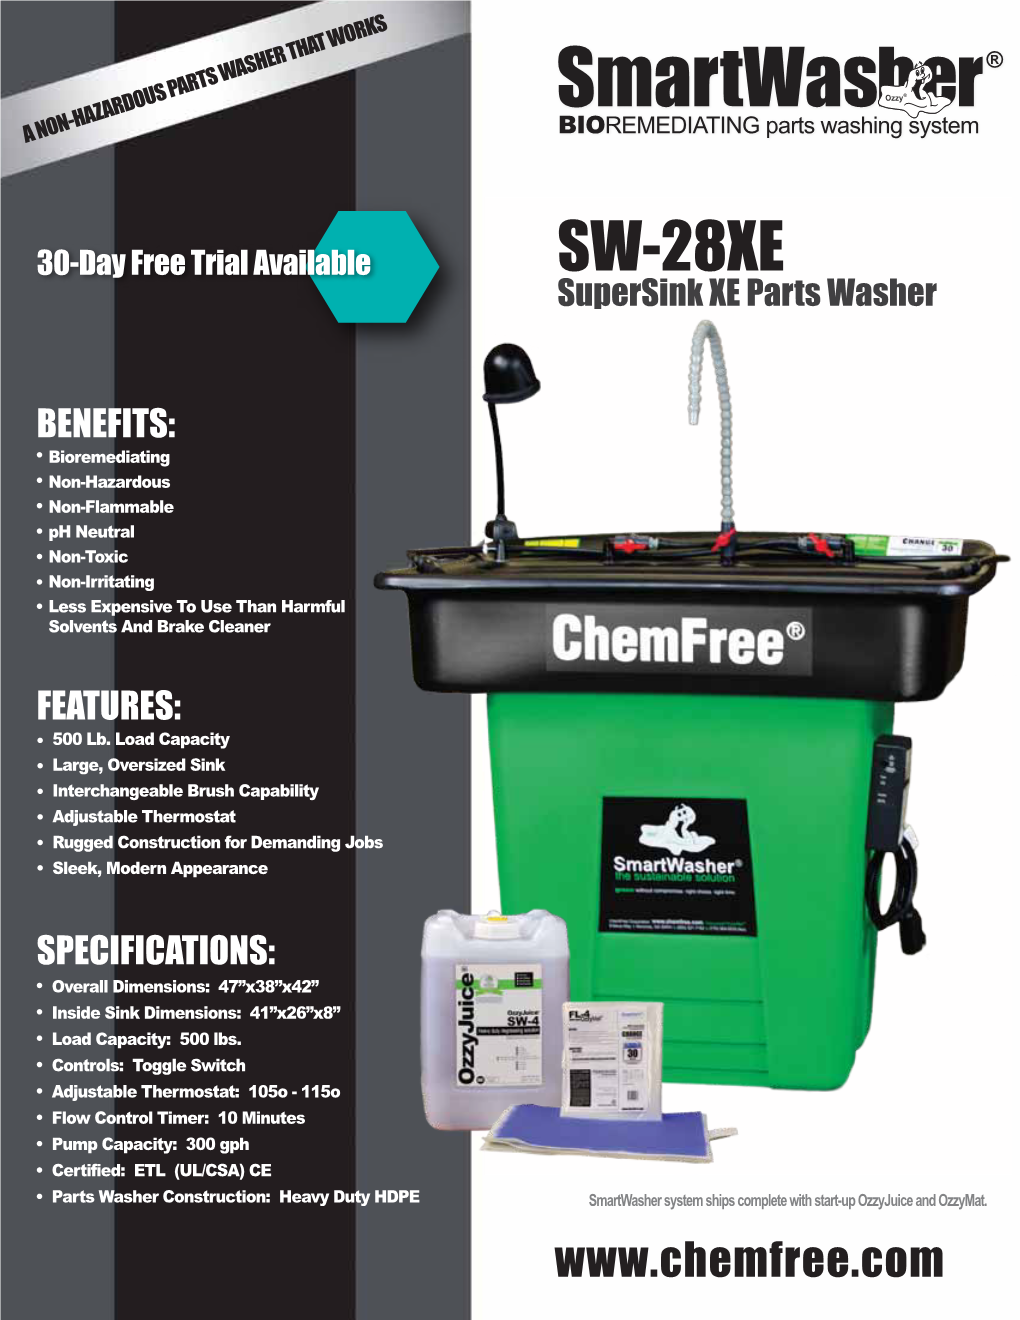 SW-28XE Supersink XE Parts Washer the Smartwasher® Bioremediating Parts Washing System Is Both Self-Cleaning and Deregulated